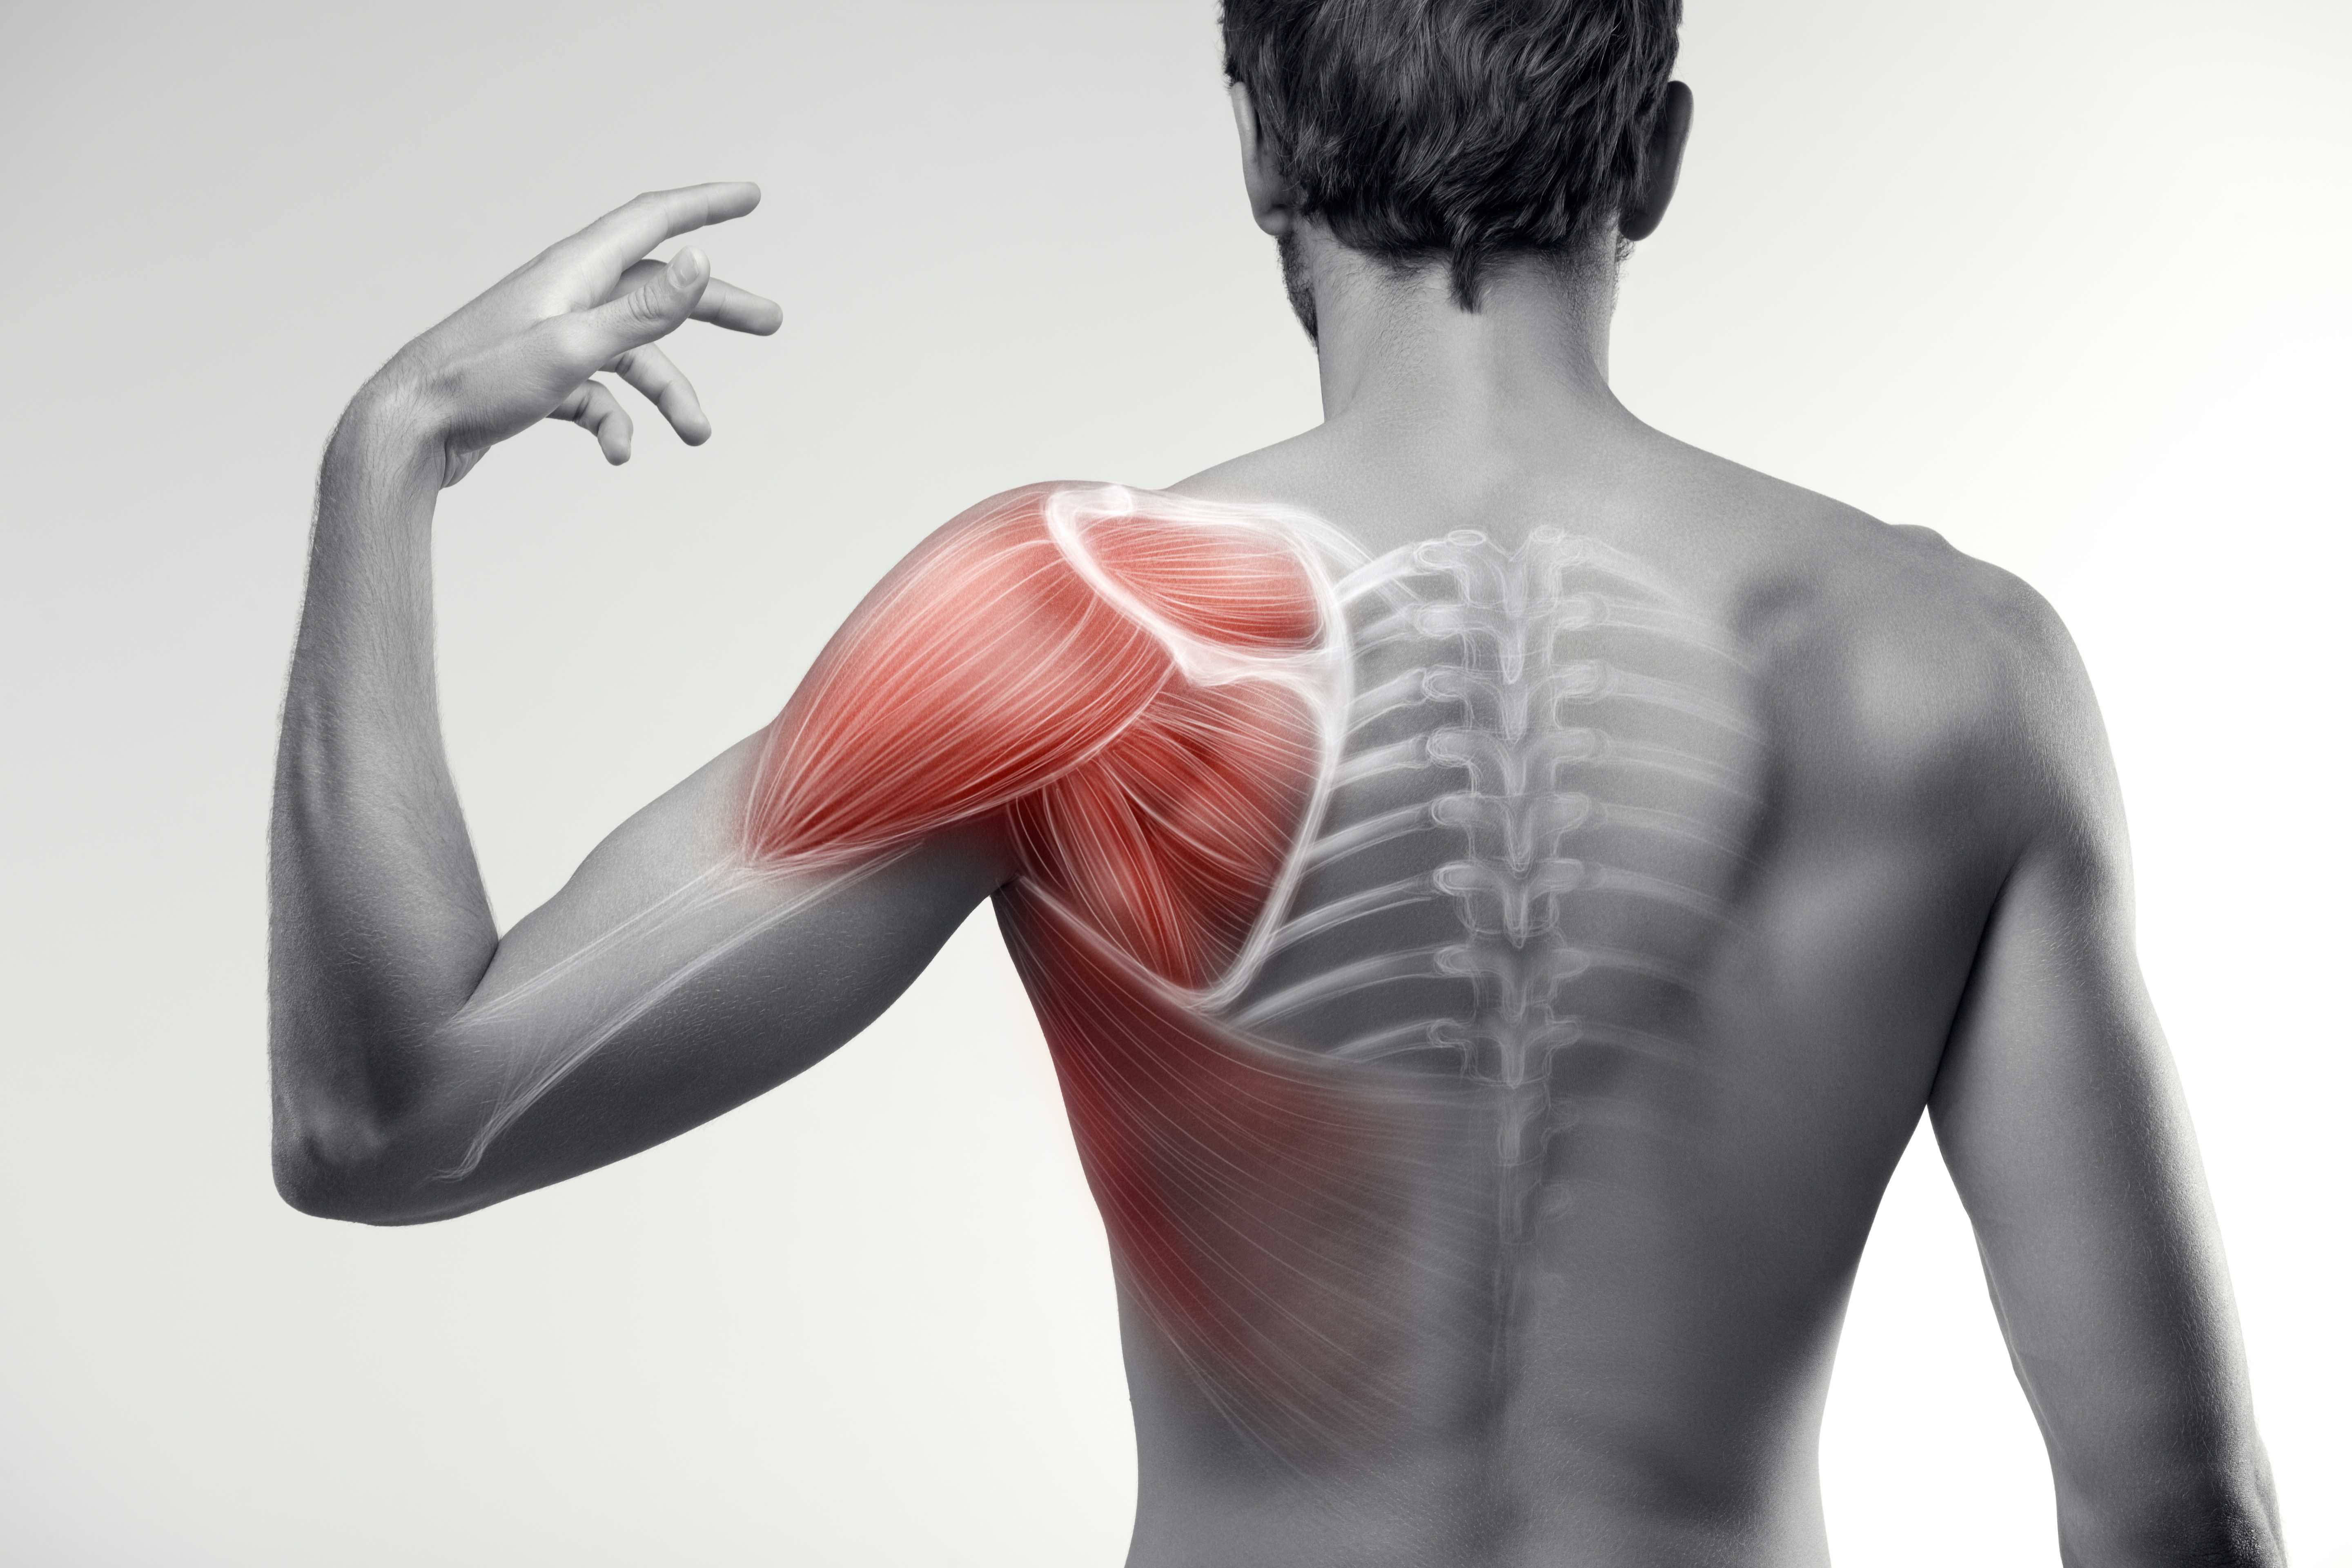 Anatomy of the Shoulder: Bones, Muscles, and Ligaments